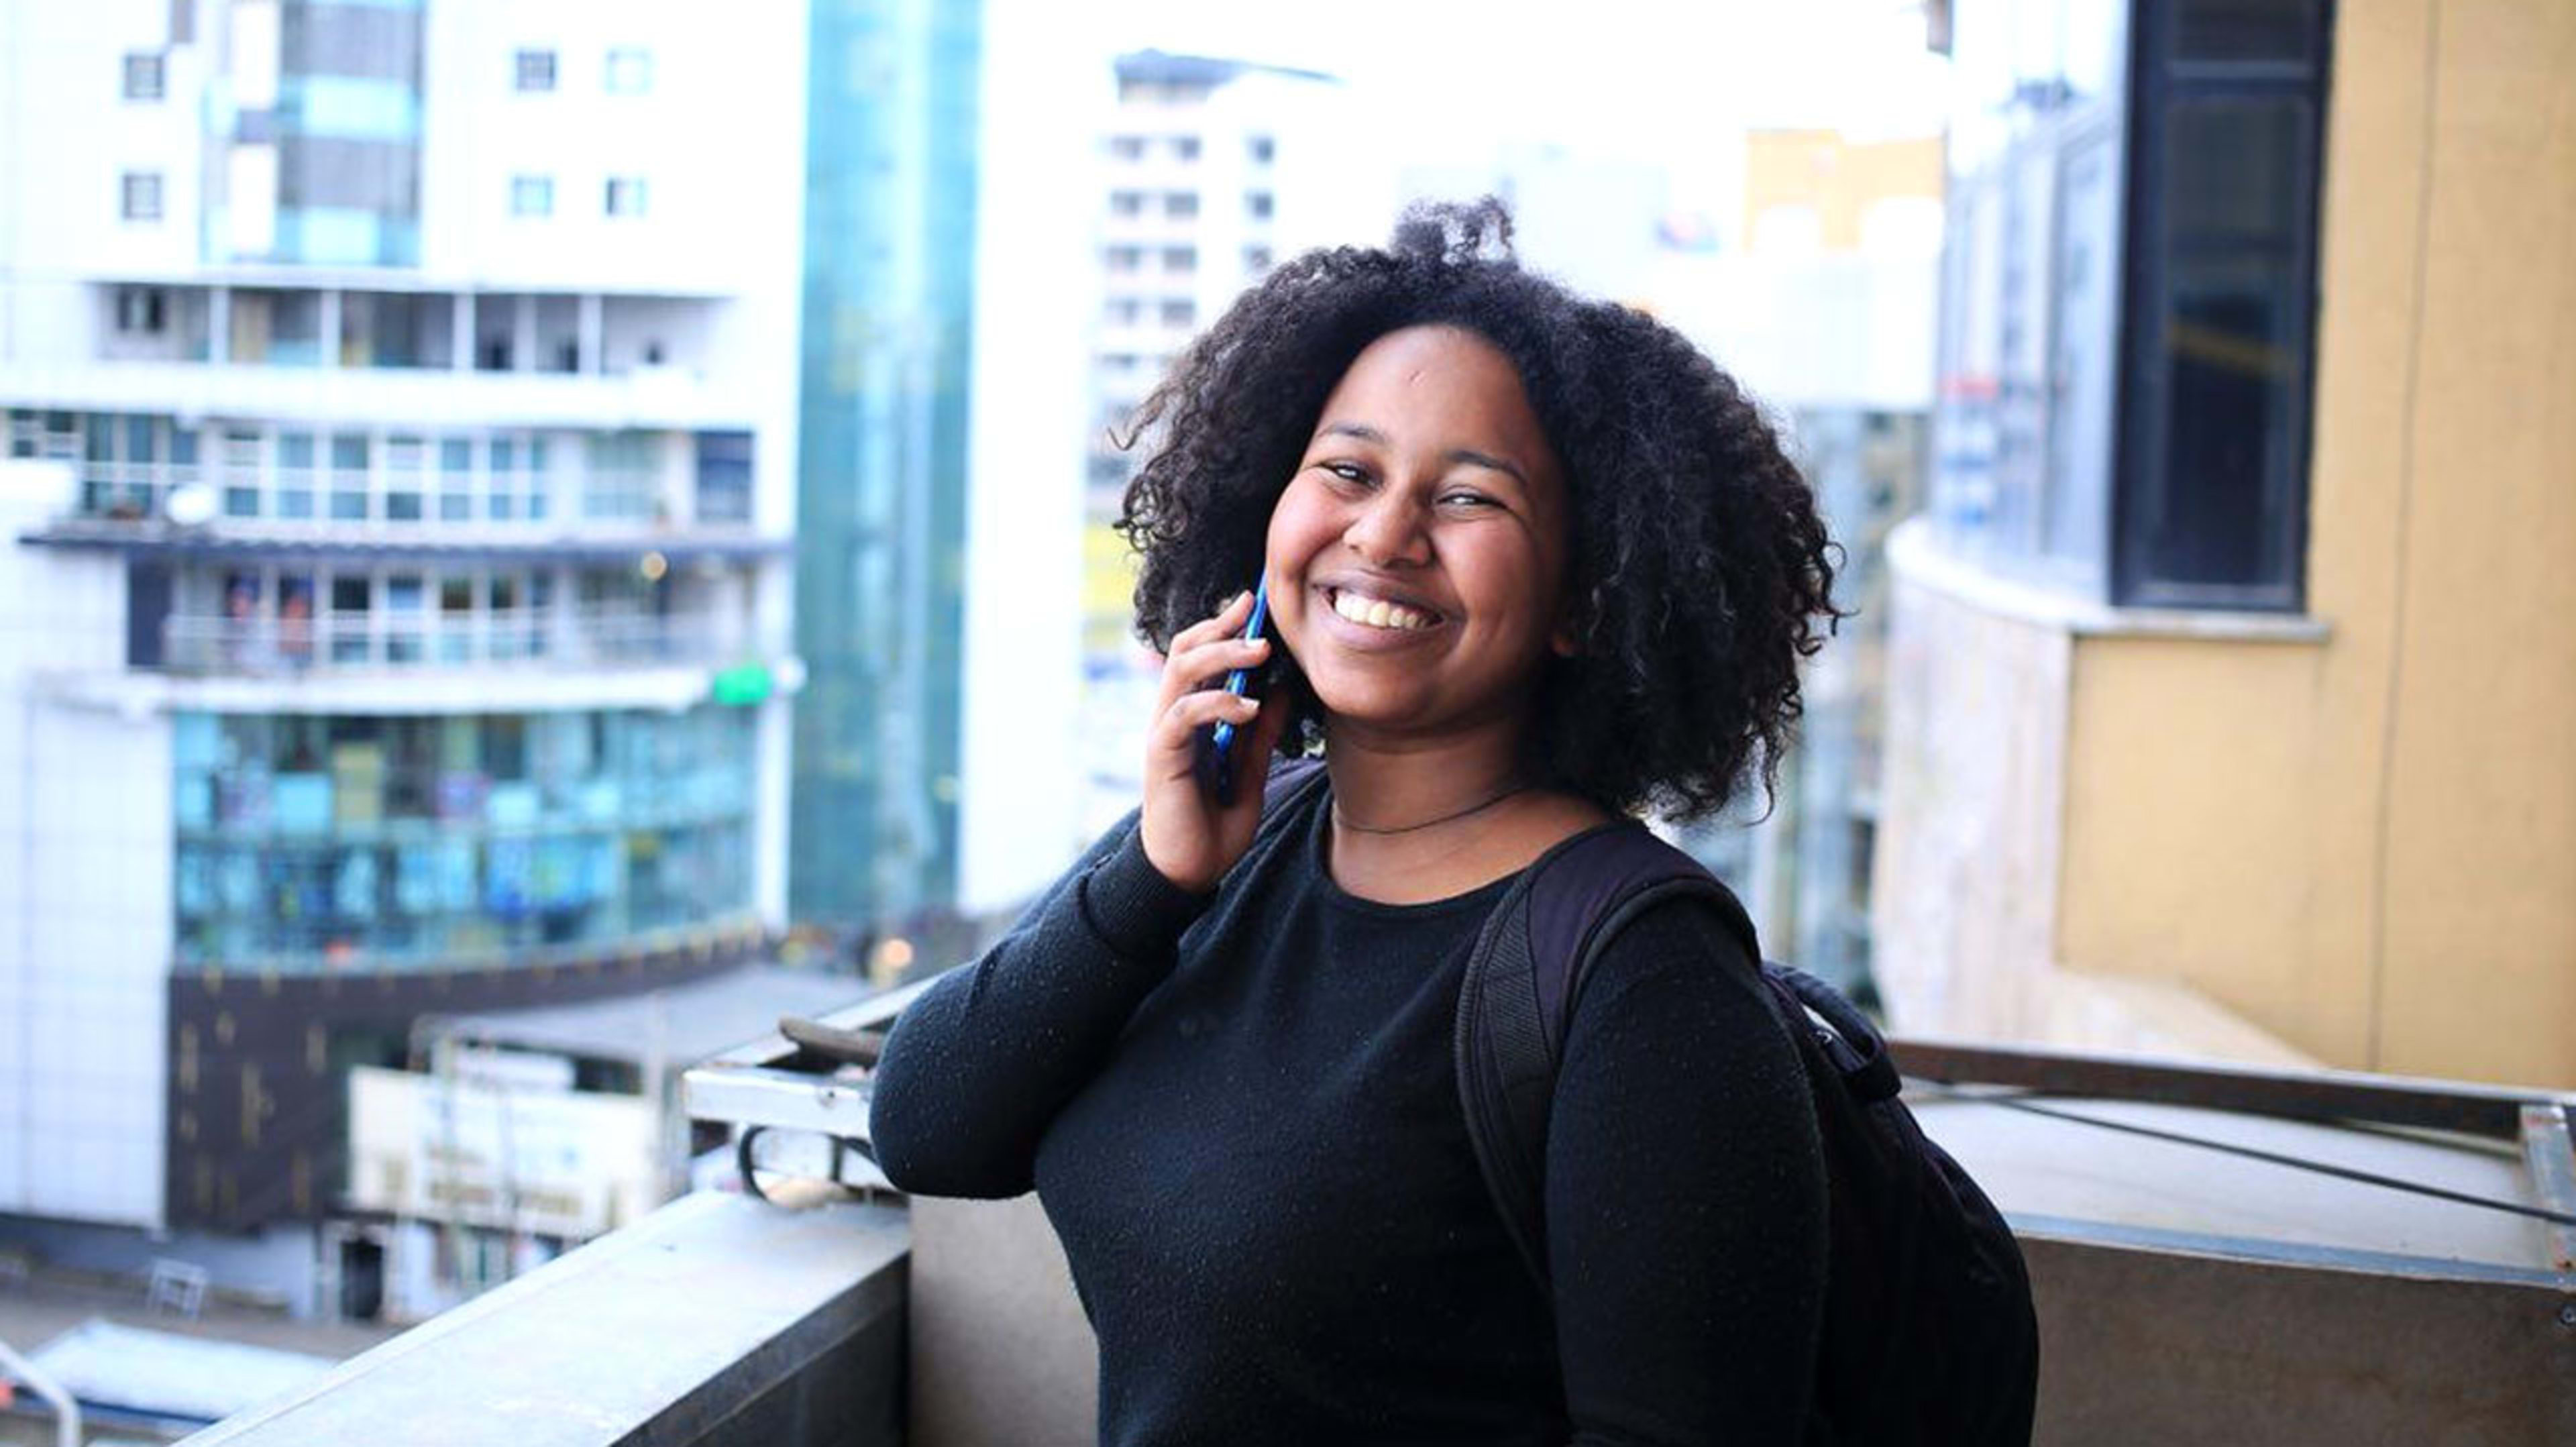 Meet the African women who are changing the ratio in tech